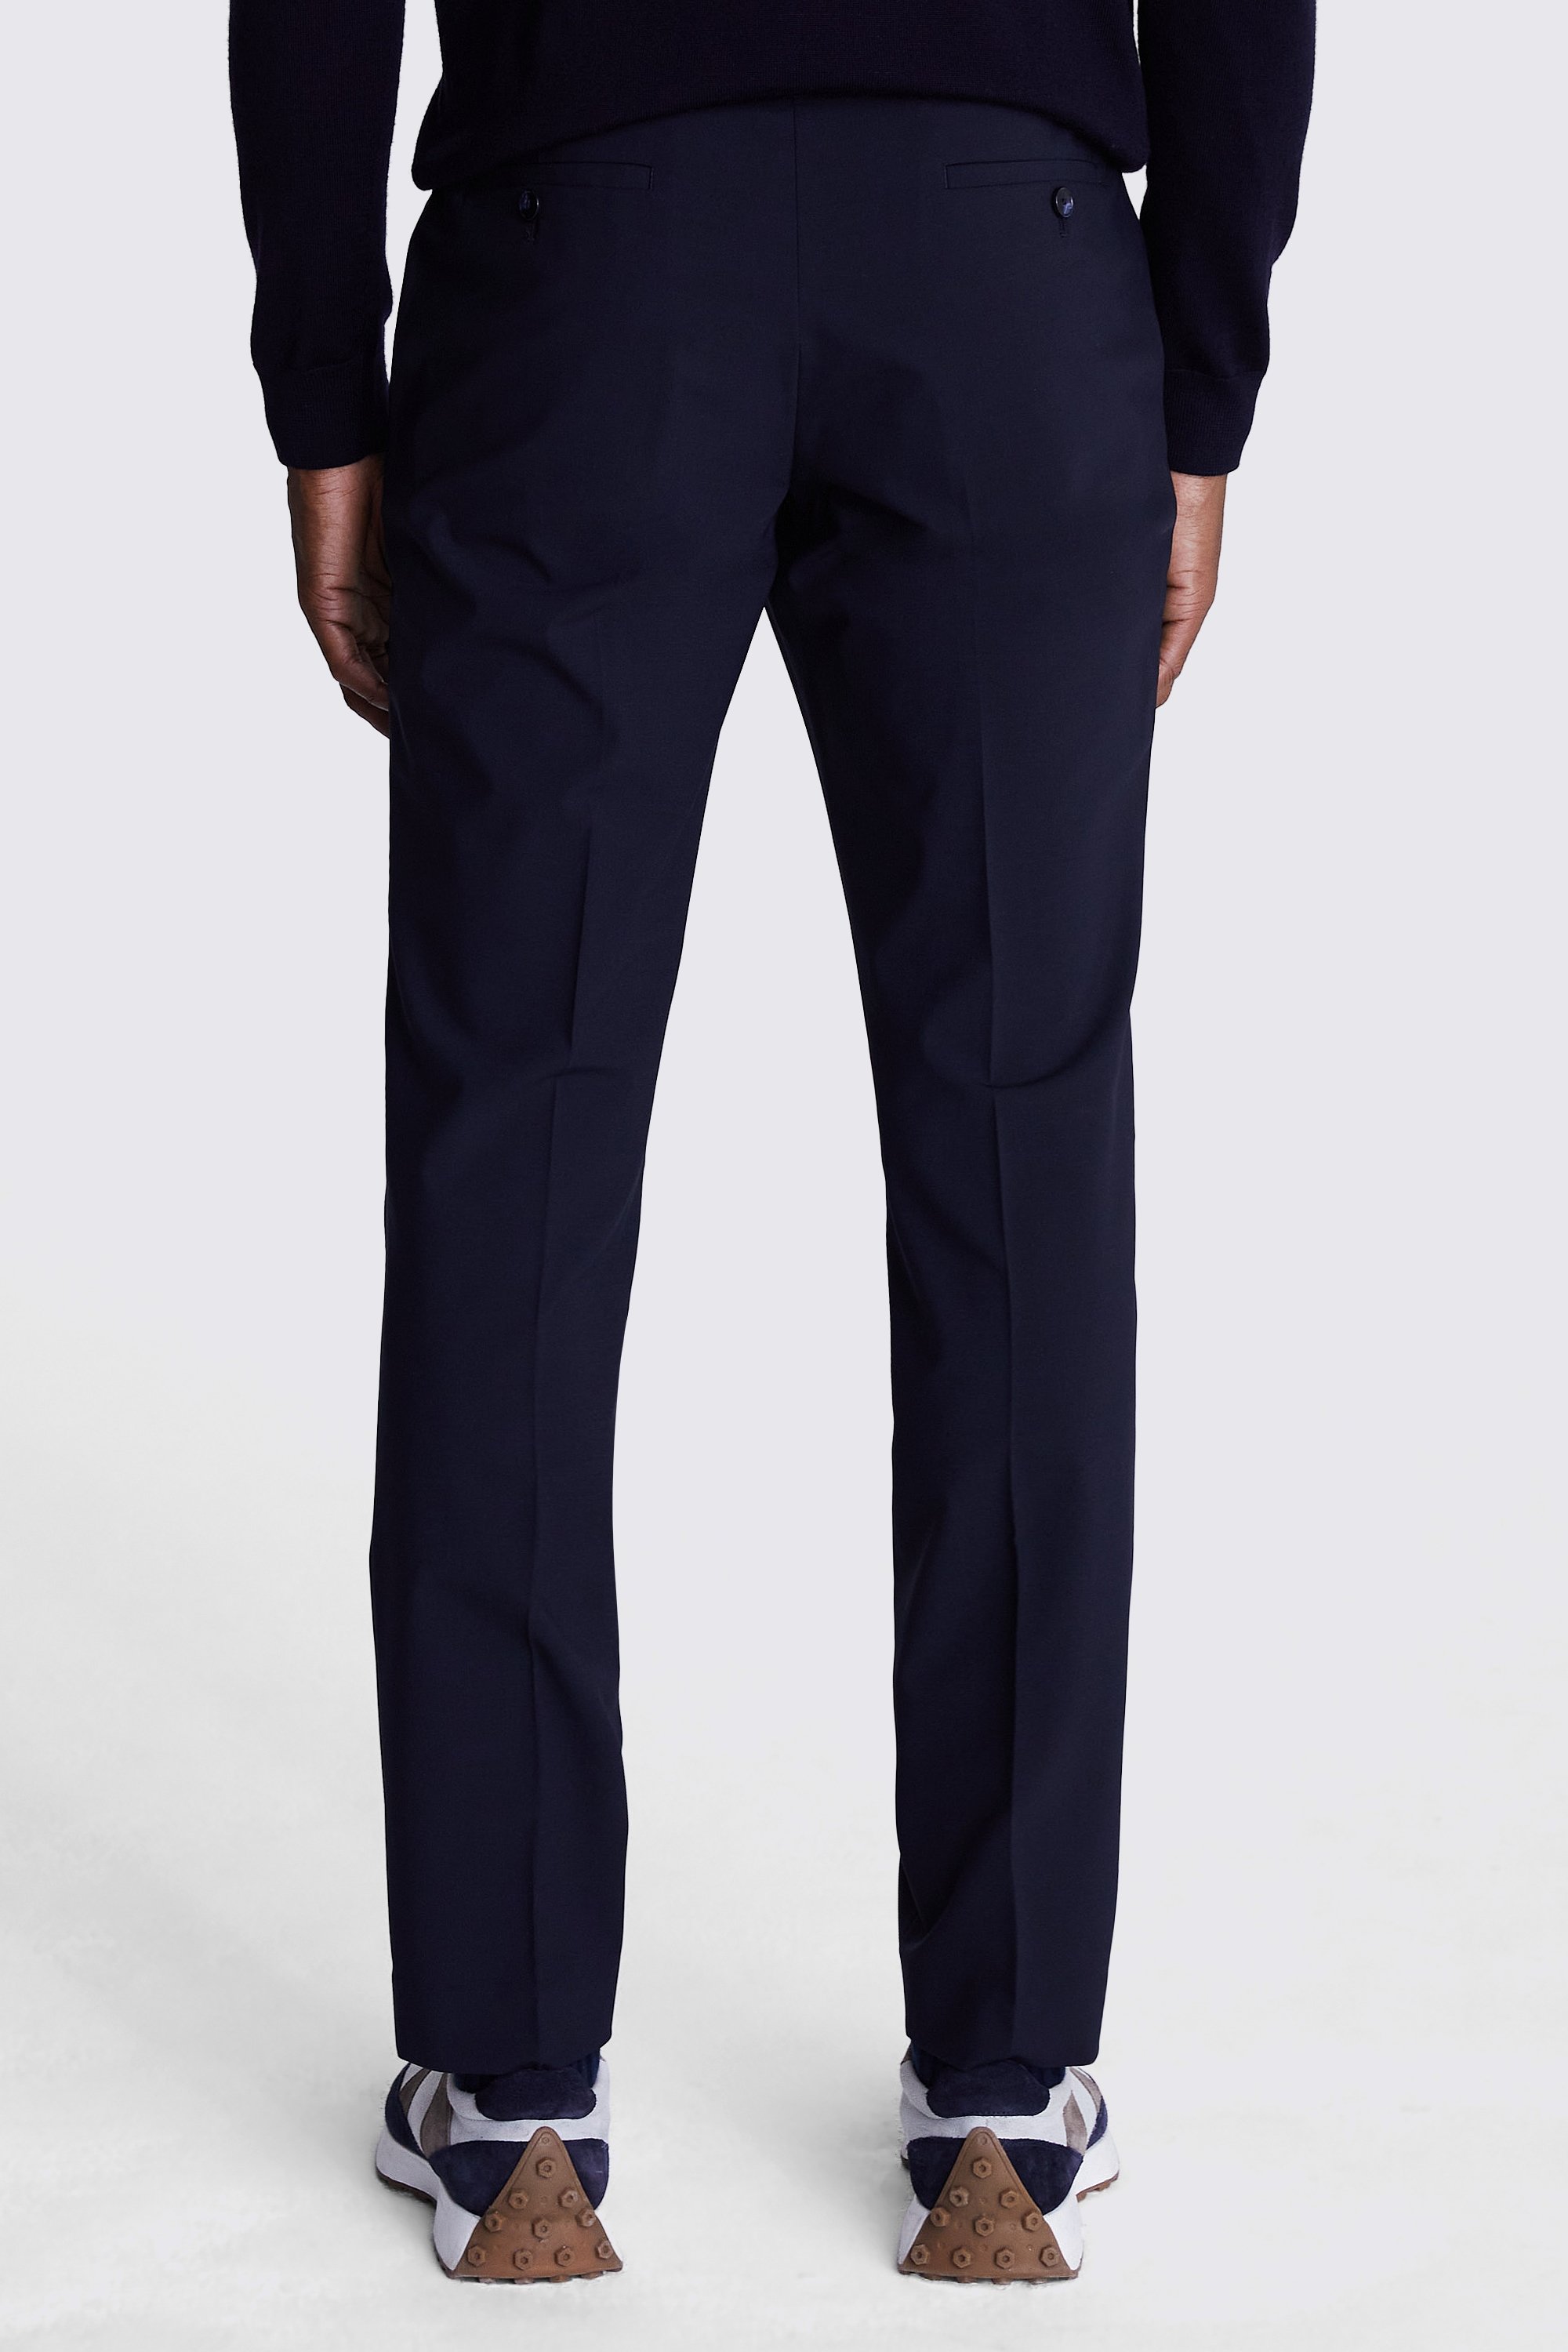 DKNY Slim Fit Navy Trousers | Buy Online at Moss